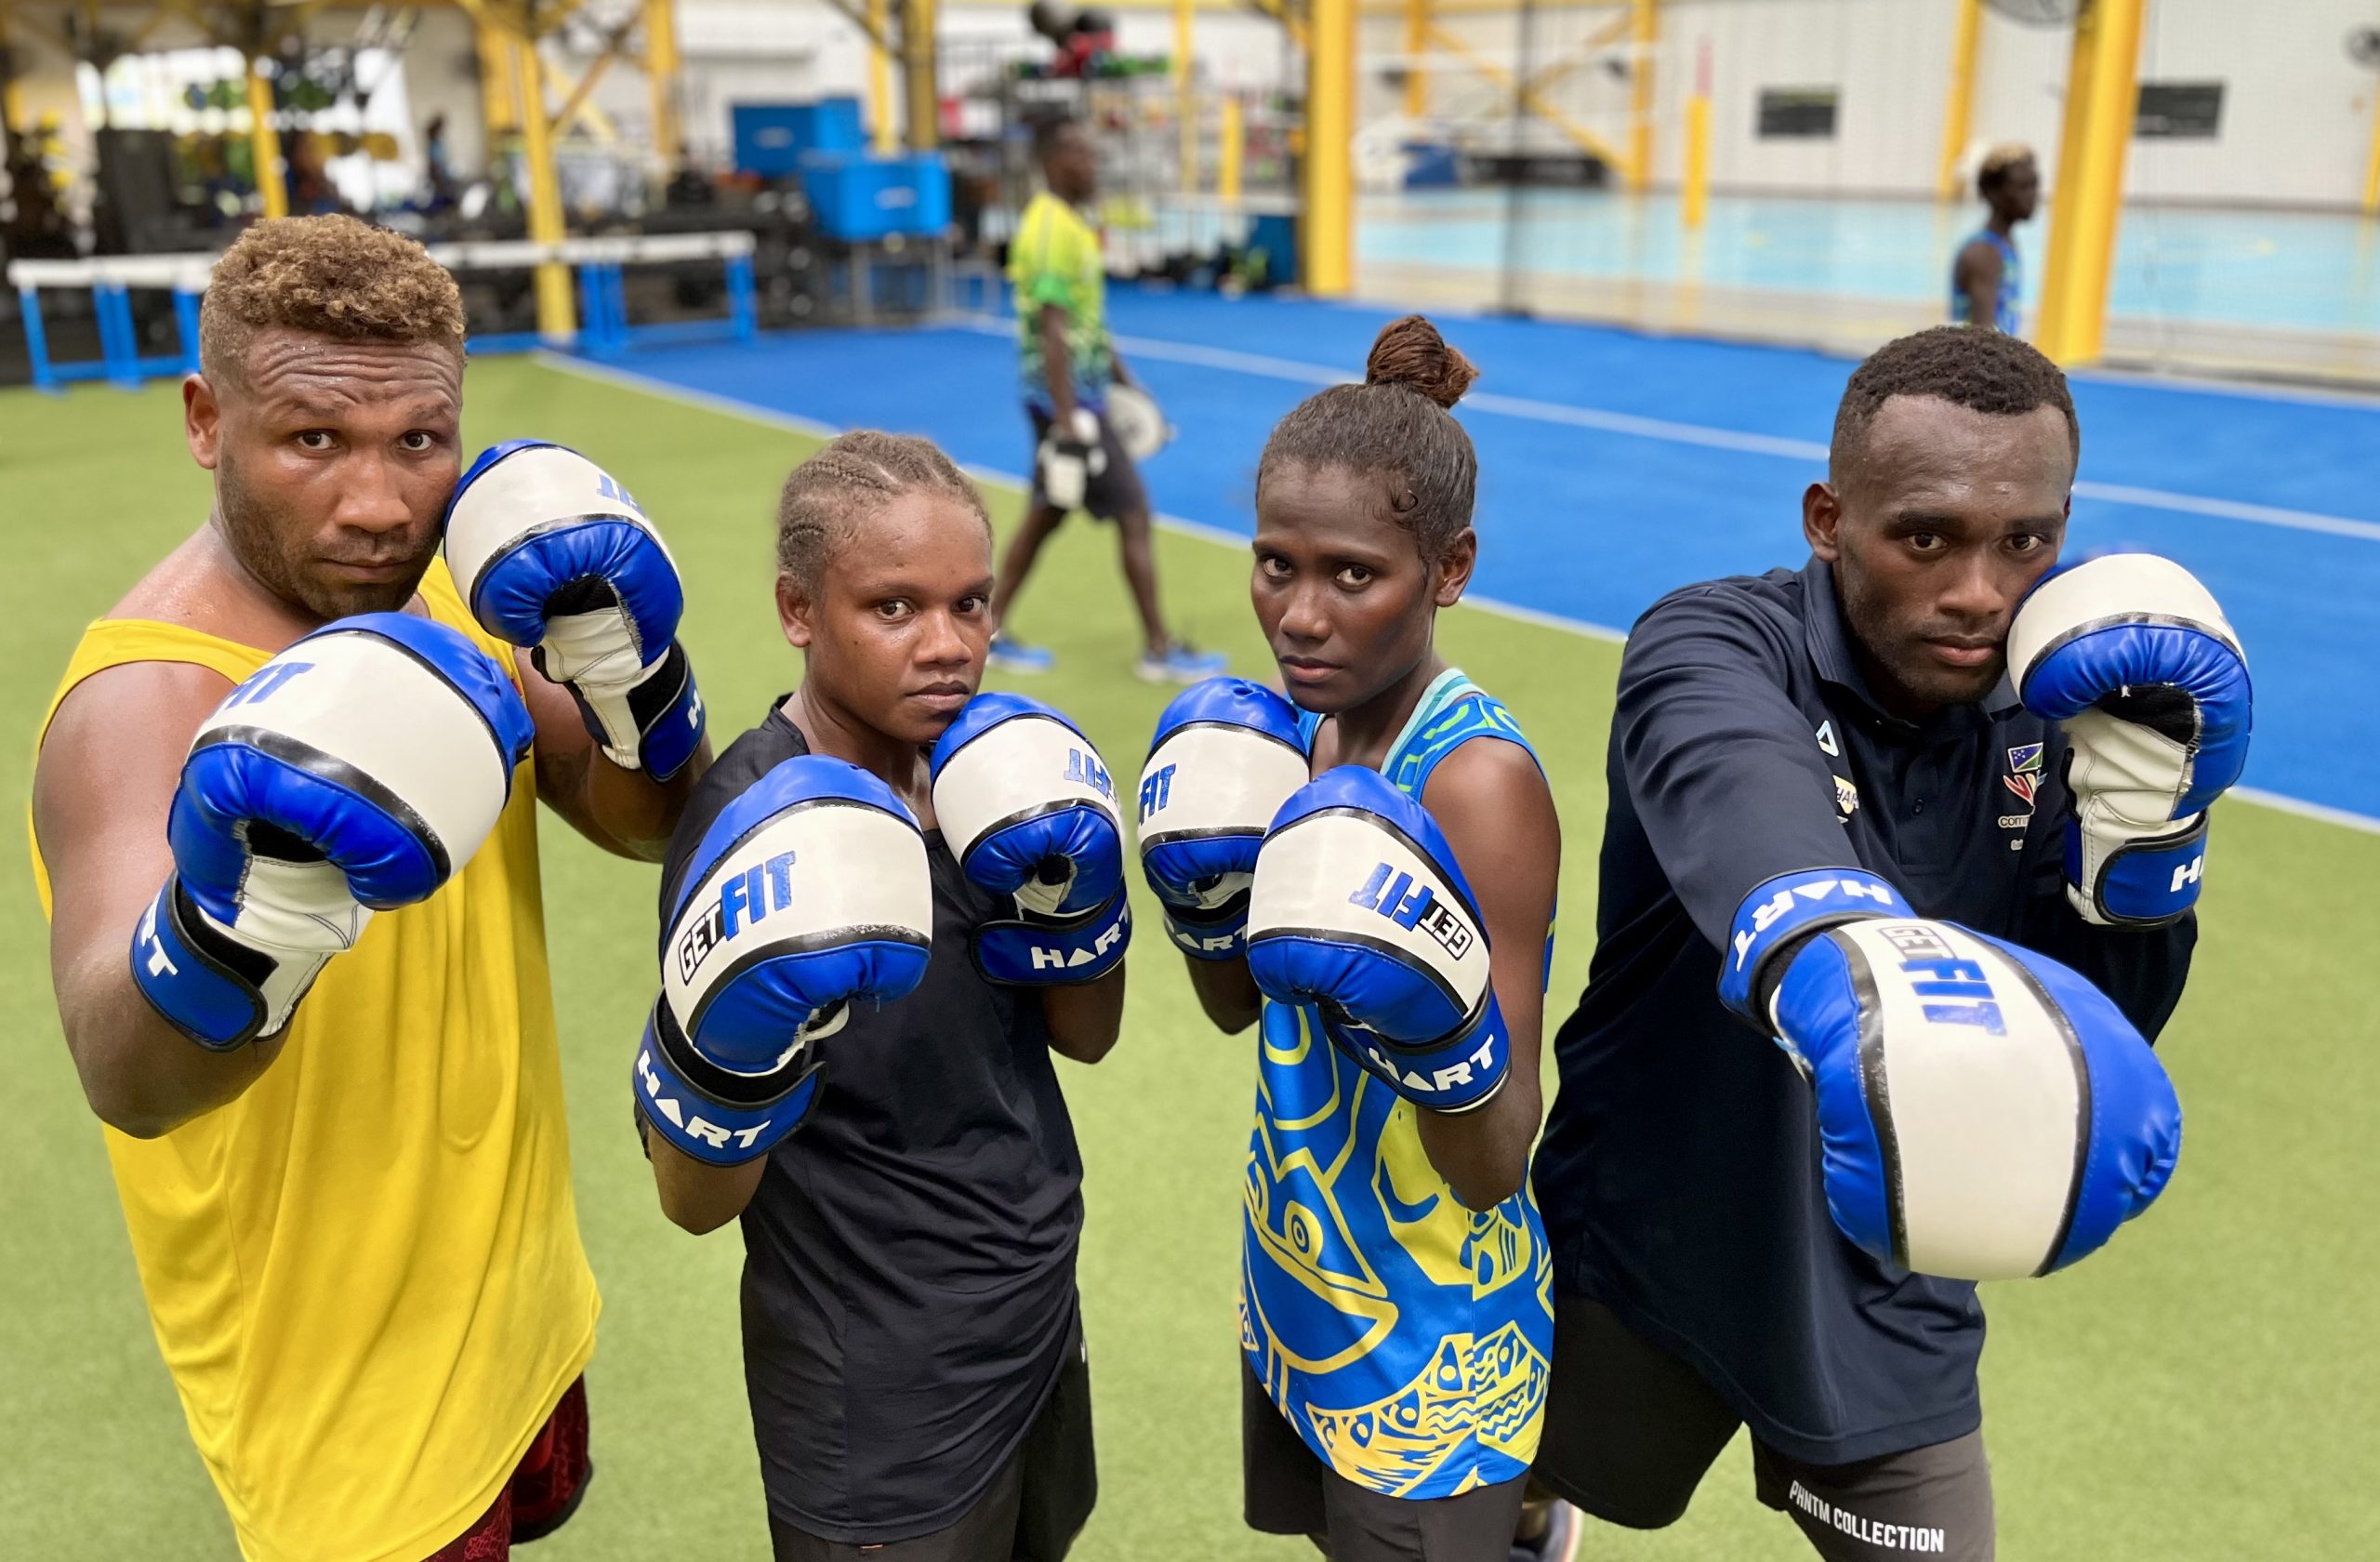 Olympic Dreams for Solomon Island Boxers